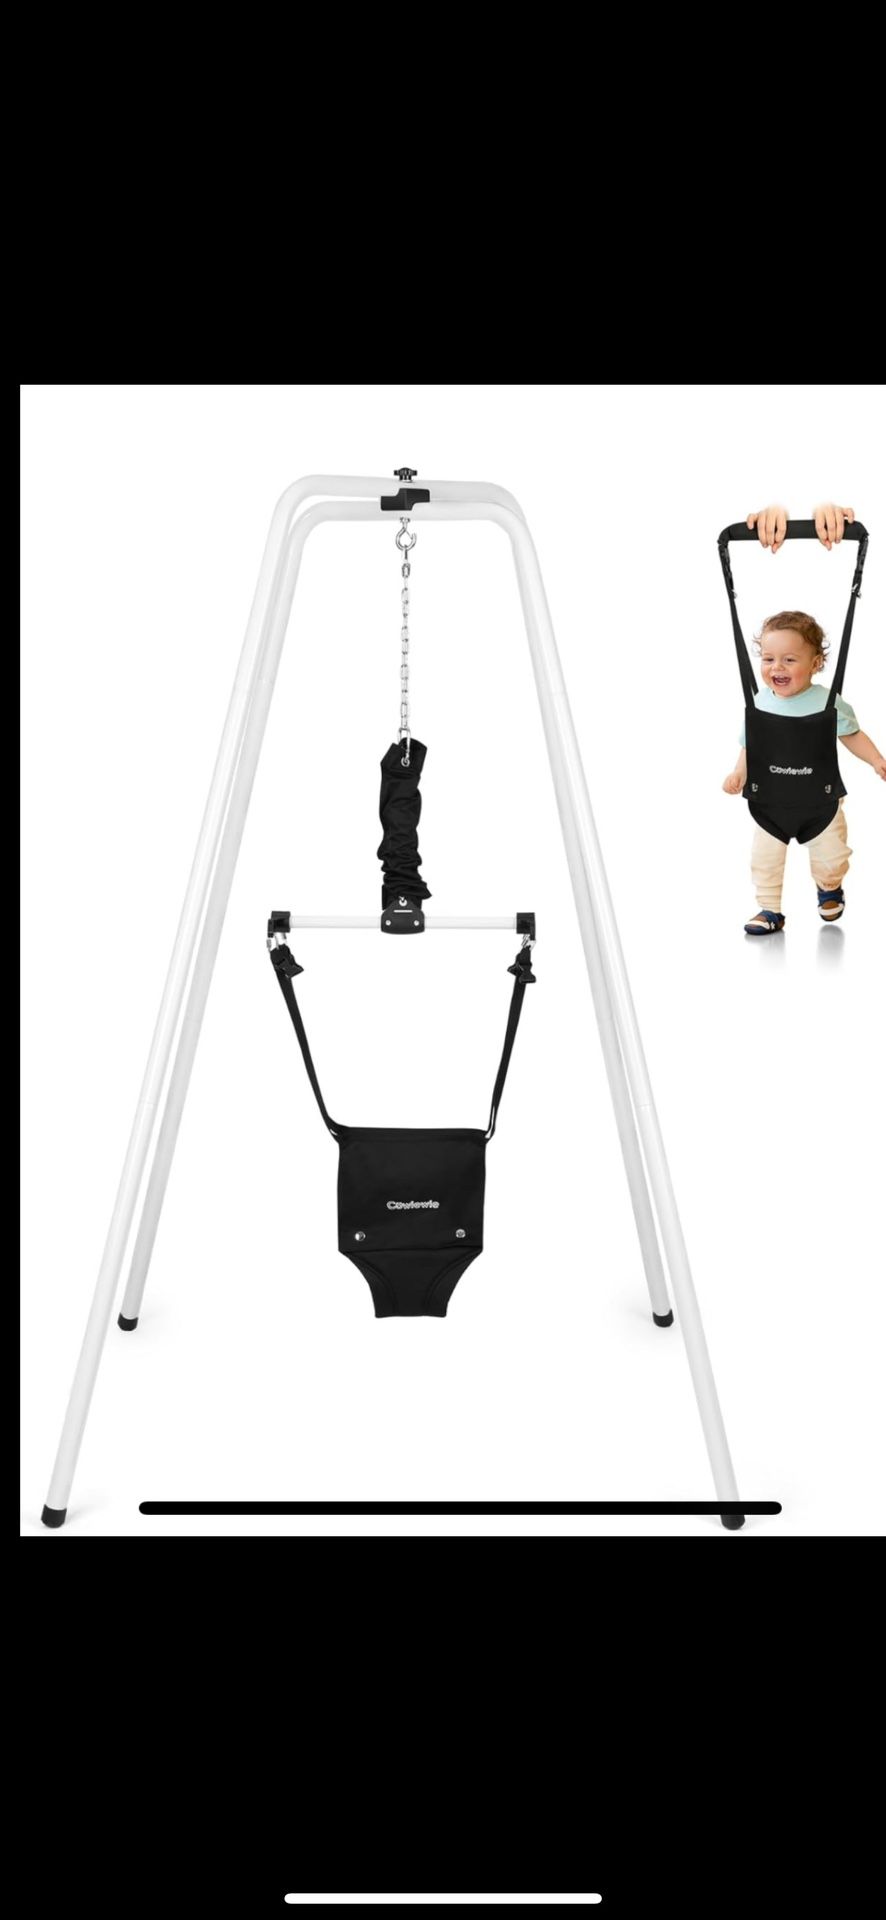 Cowiewie 2 in 1 Baby Jumper with Strong Support Stand